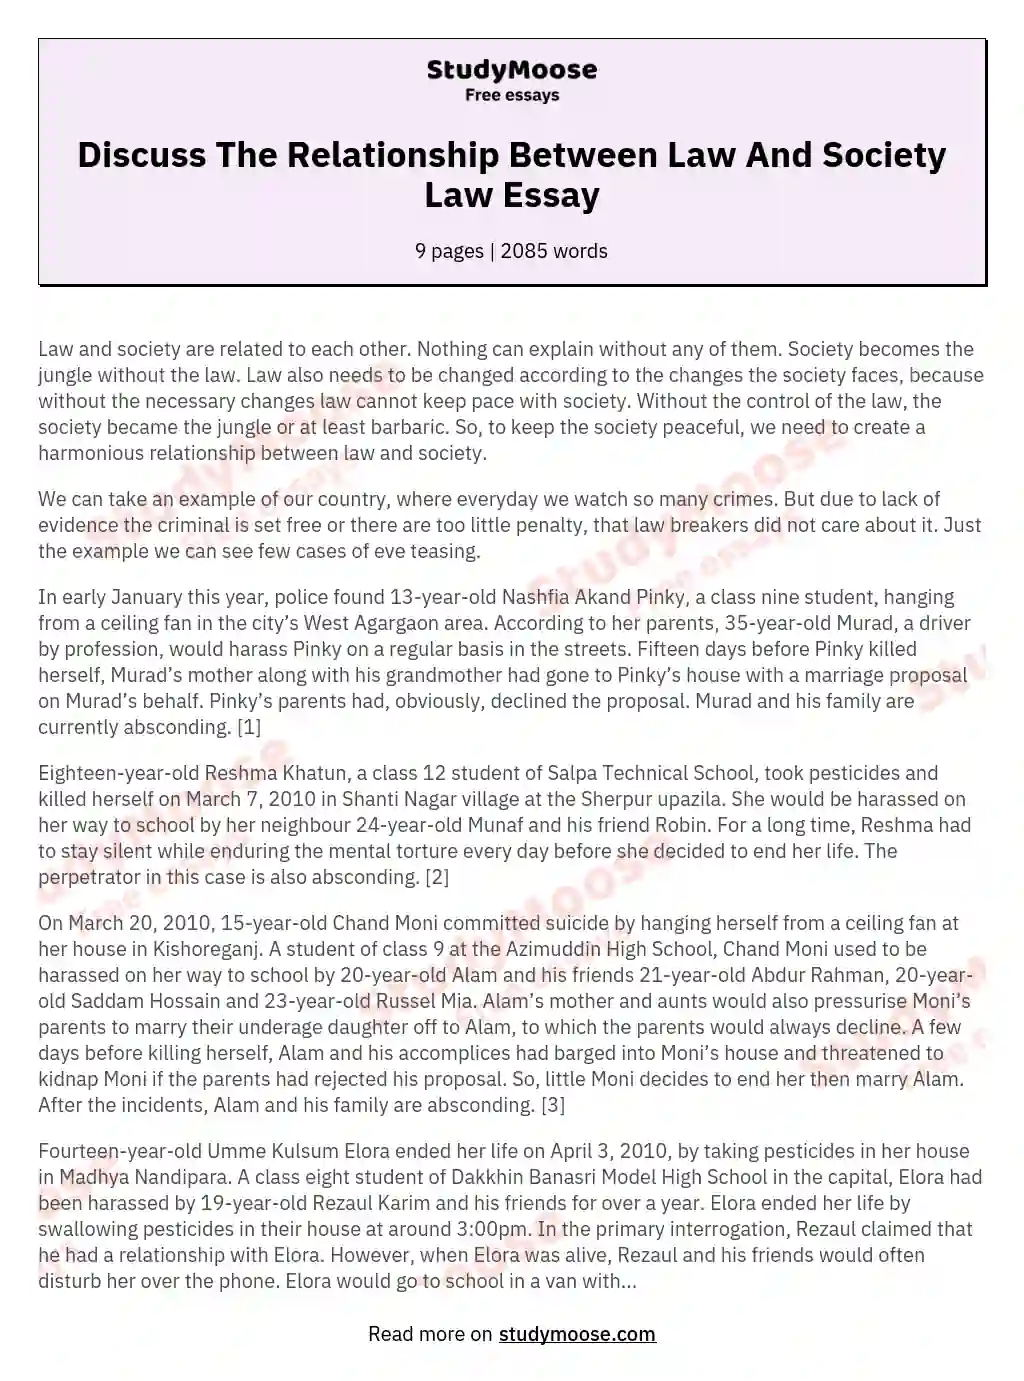 Discuss The Relationship Between Law And Society Law Essay